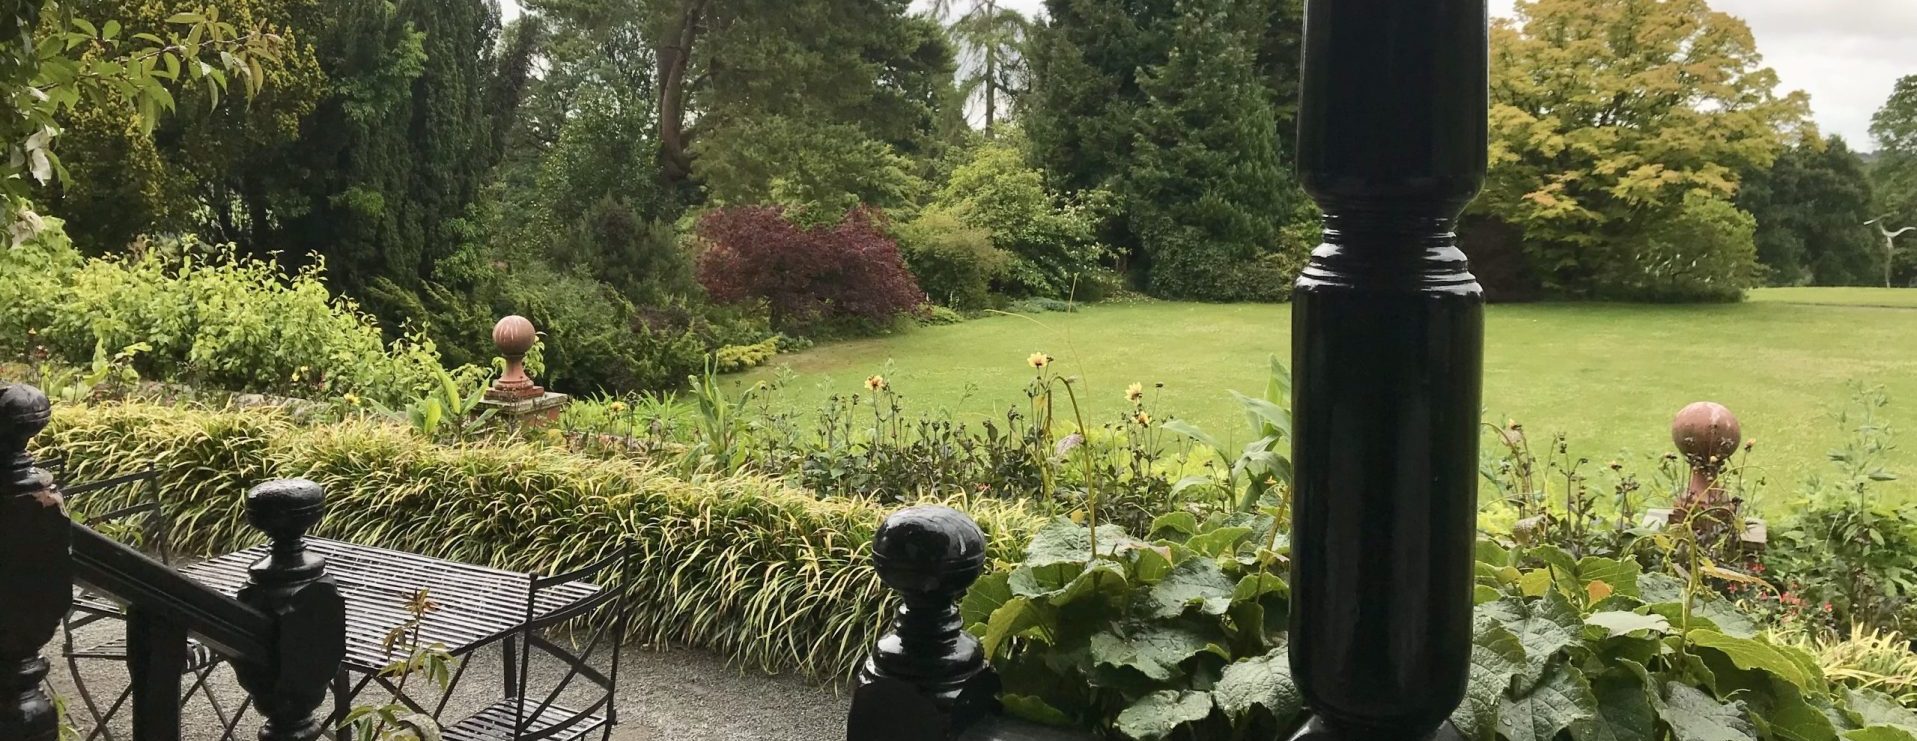 A view of the gardens looking out from the veranda